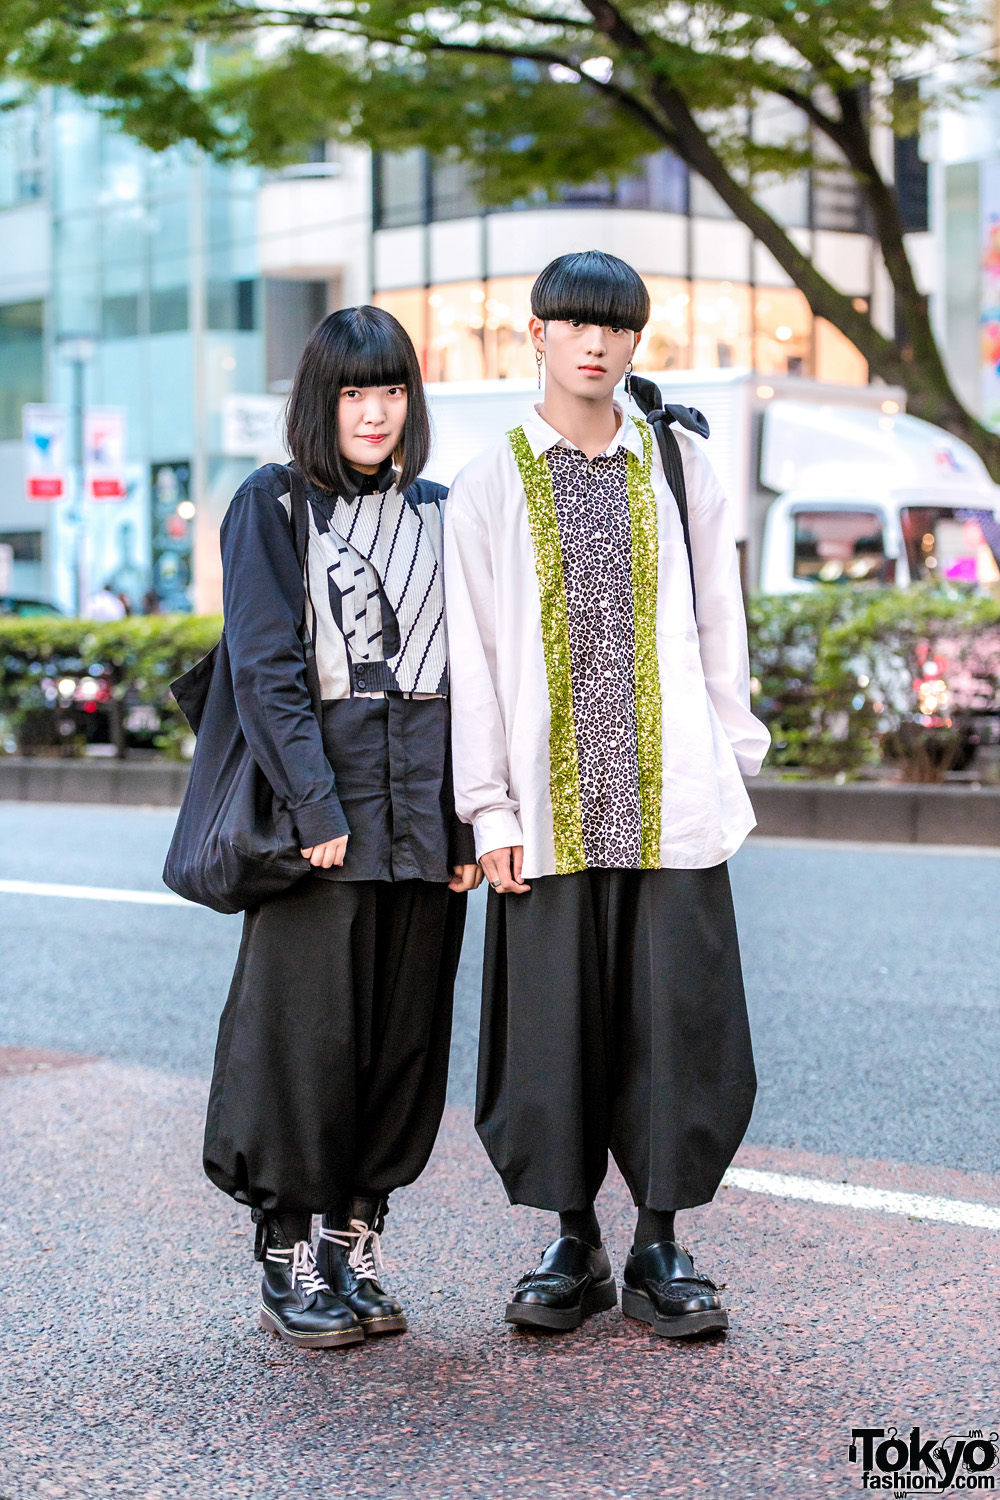 Minimalist Japanese Streetwear Styles in Harajuku w/ Facetasm, Yohji Yamamoto Pour Homme, Anrealage & Comme des Garcons Homme